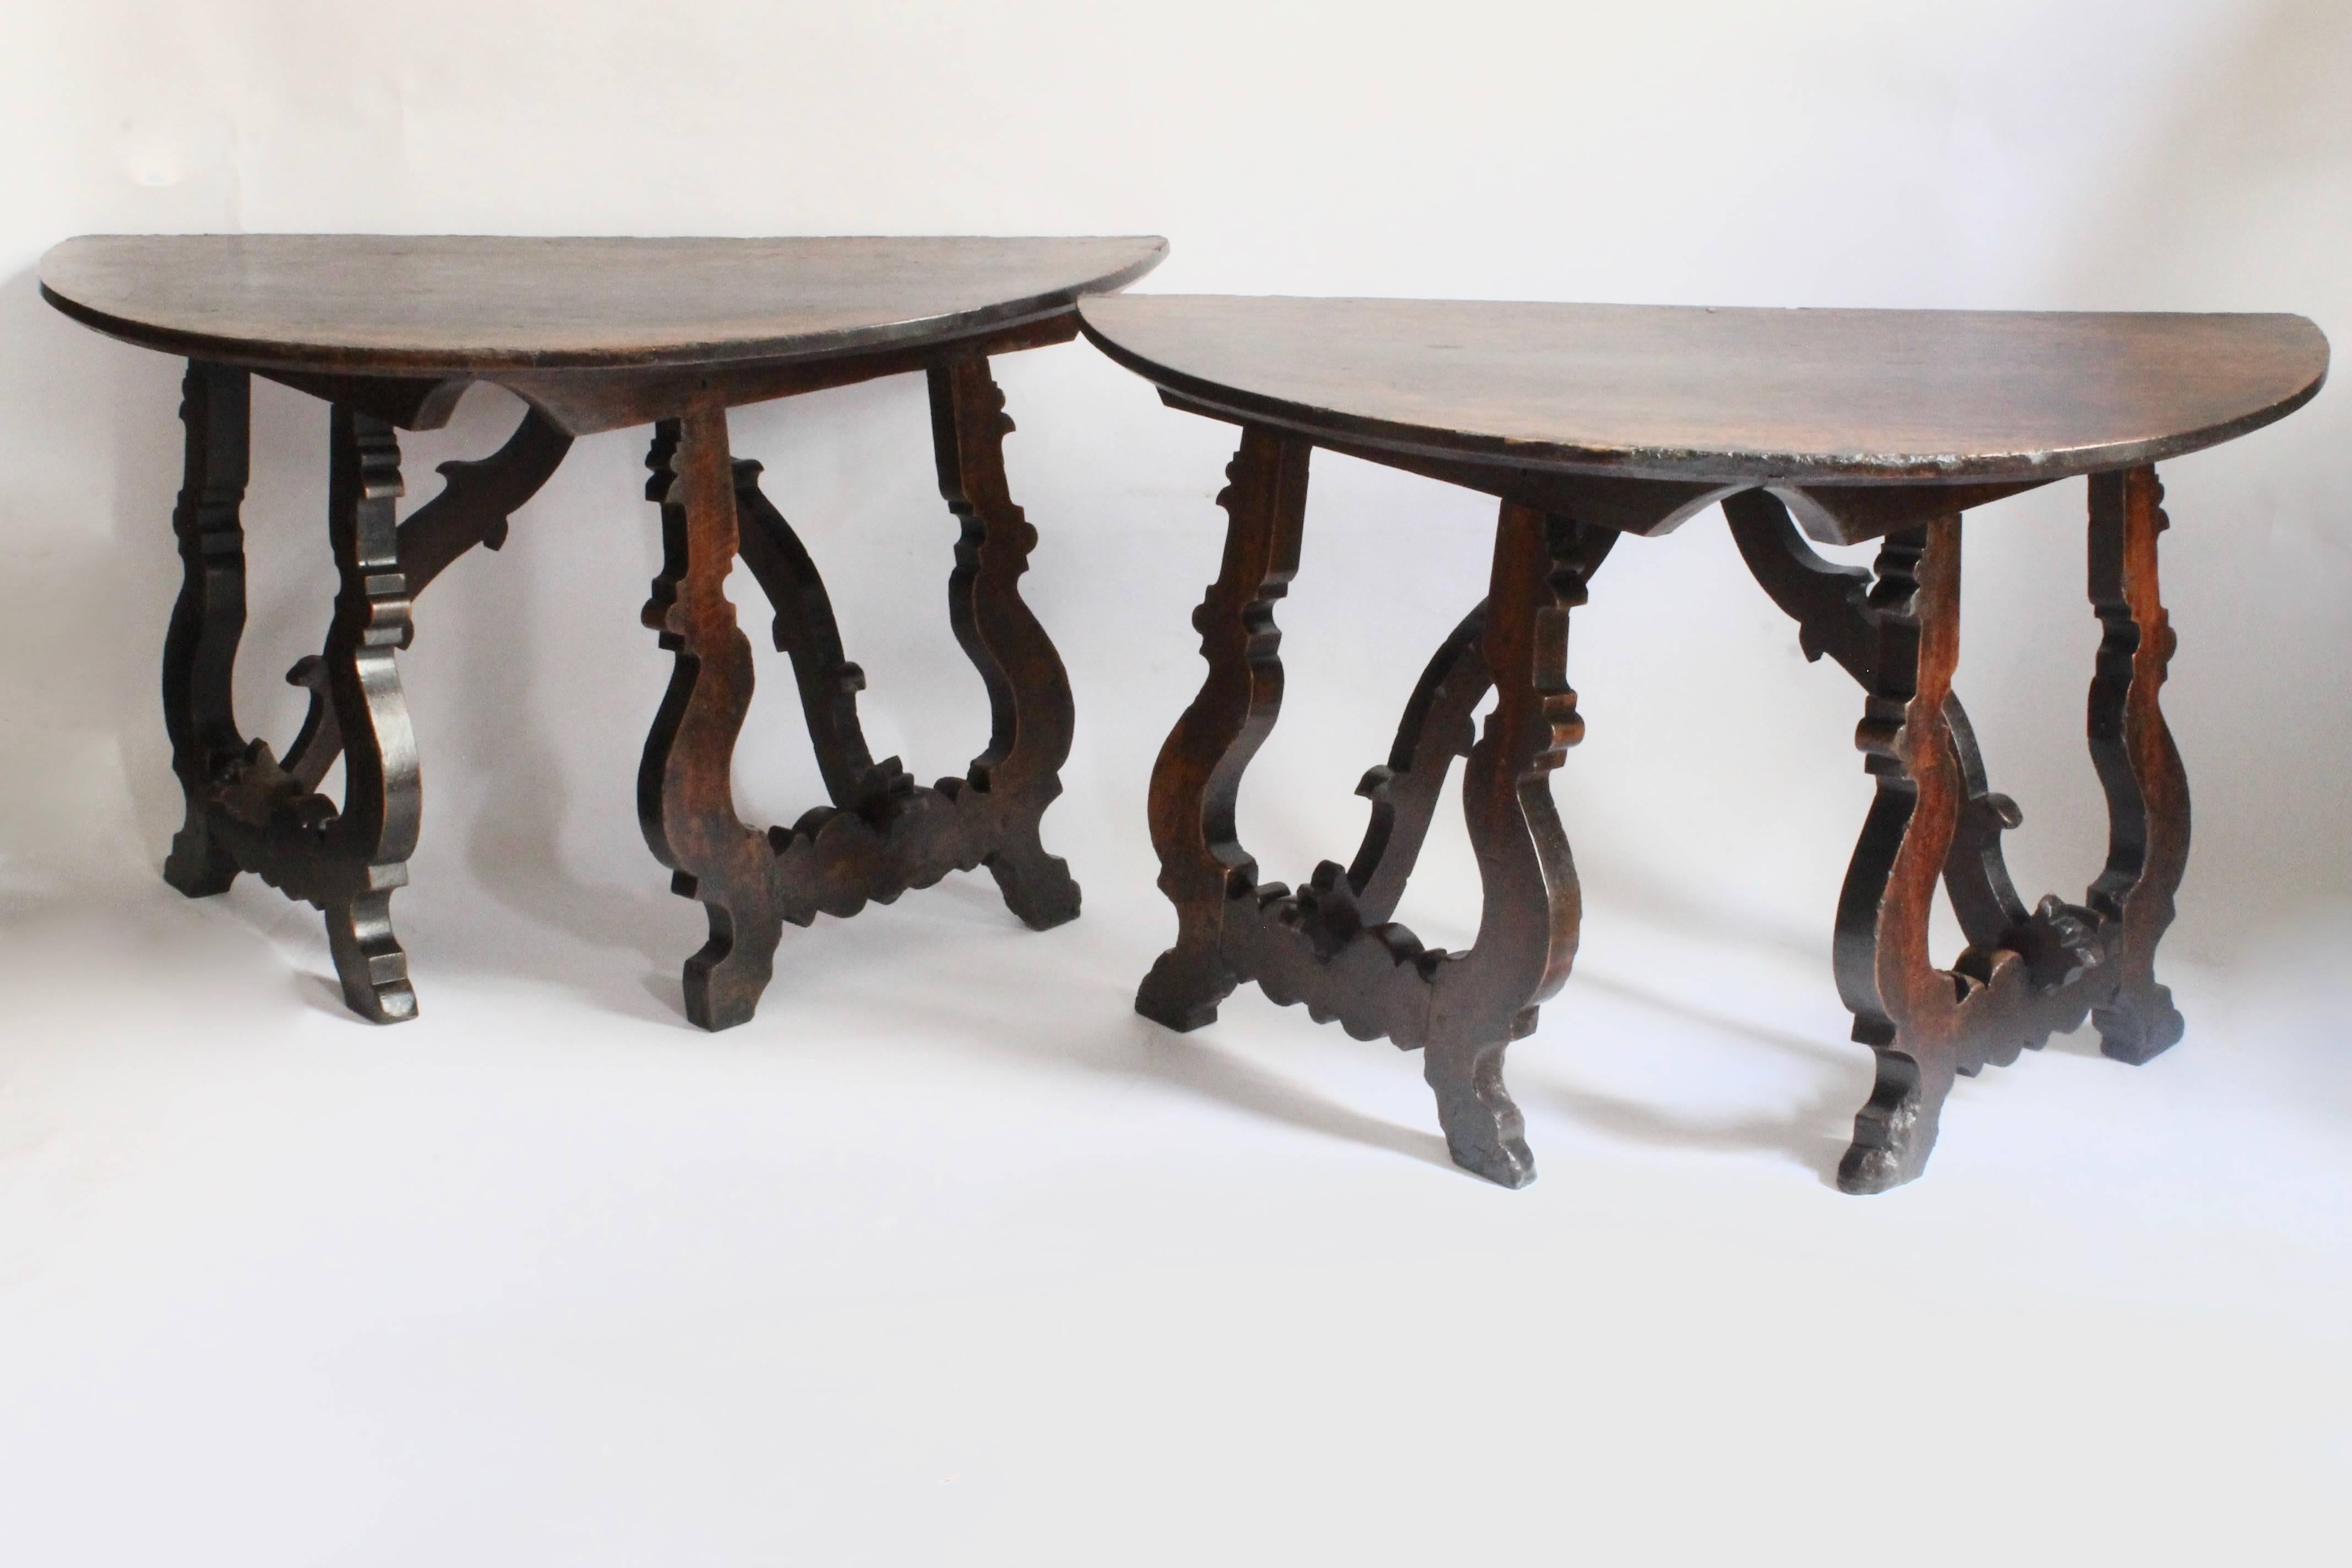 Patinated Pair of Walnut Demilune Console Tables, Italy, Tuscany, 17th Century For Sale